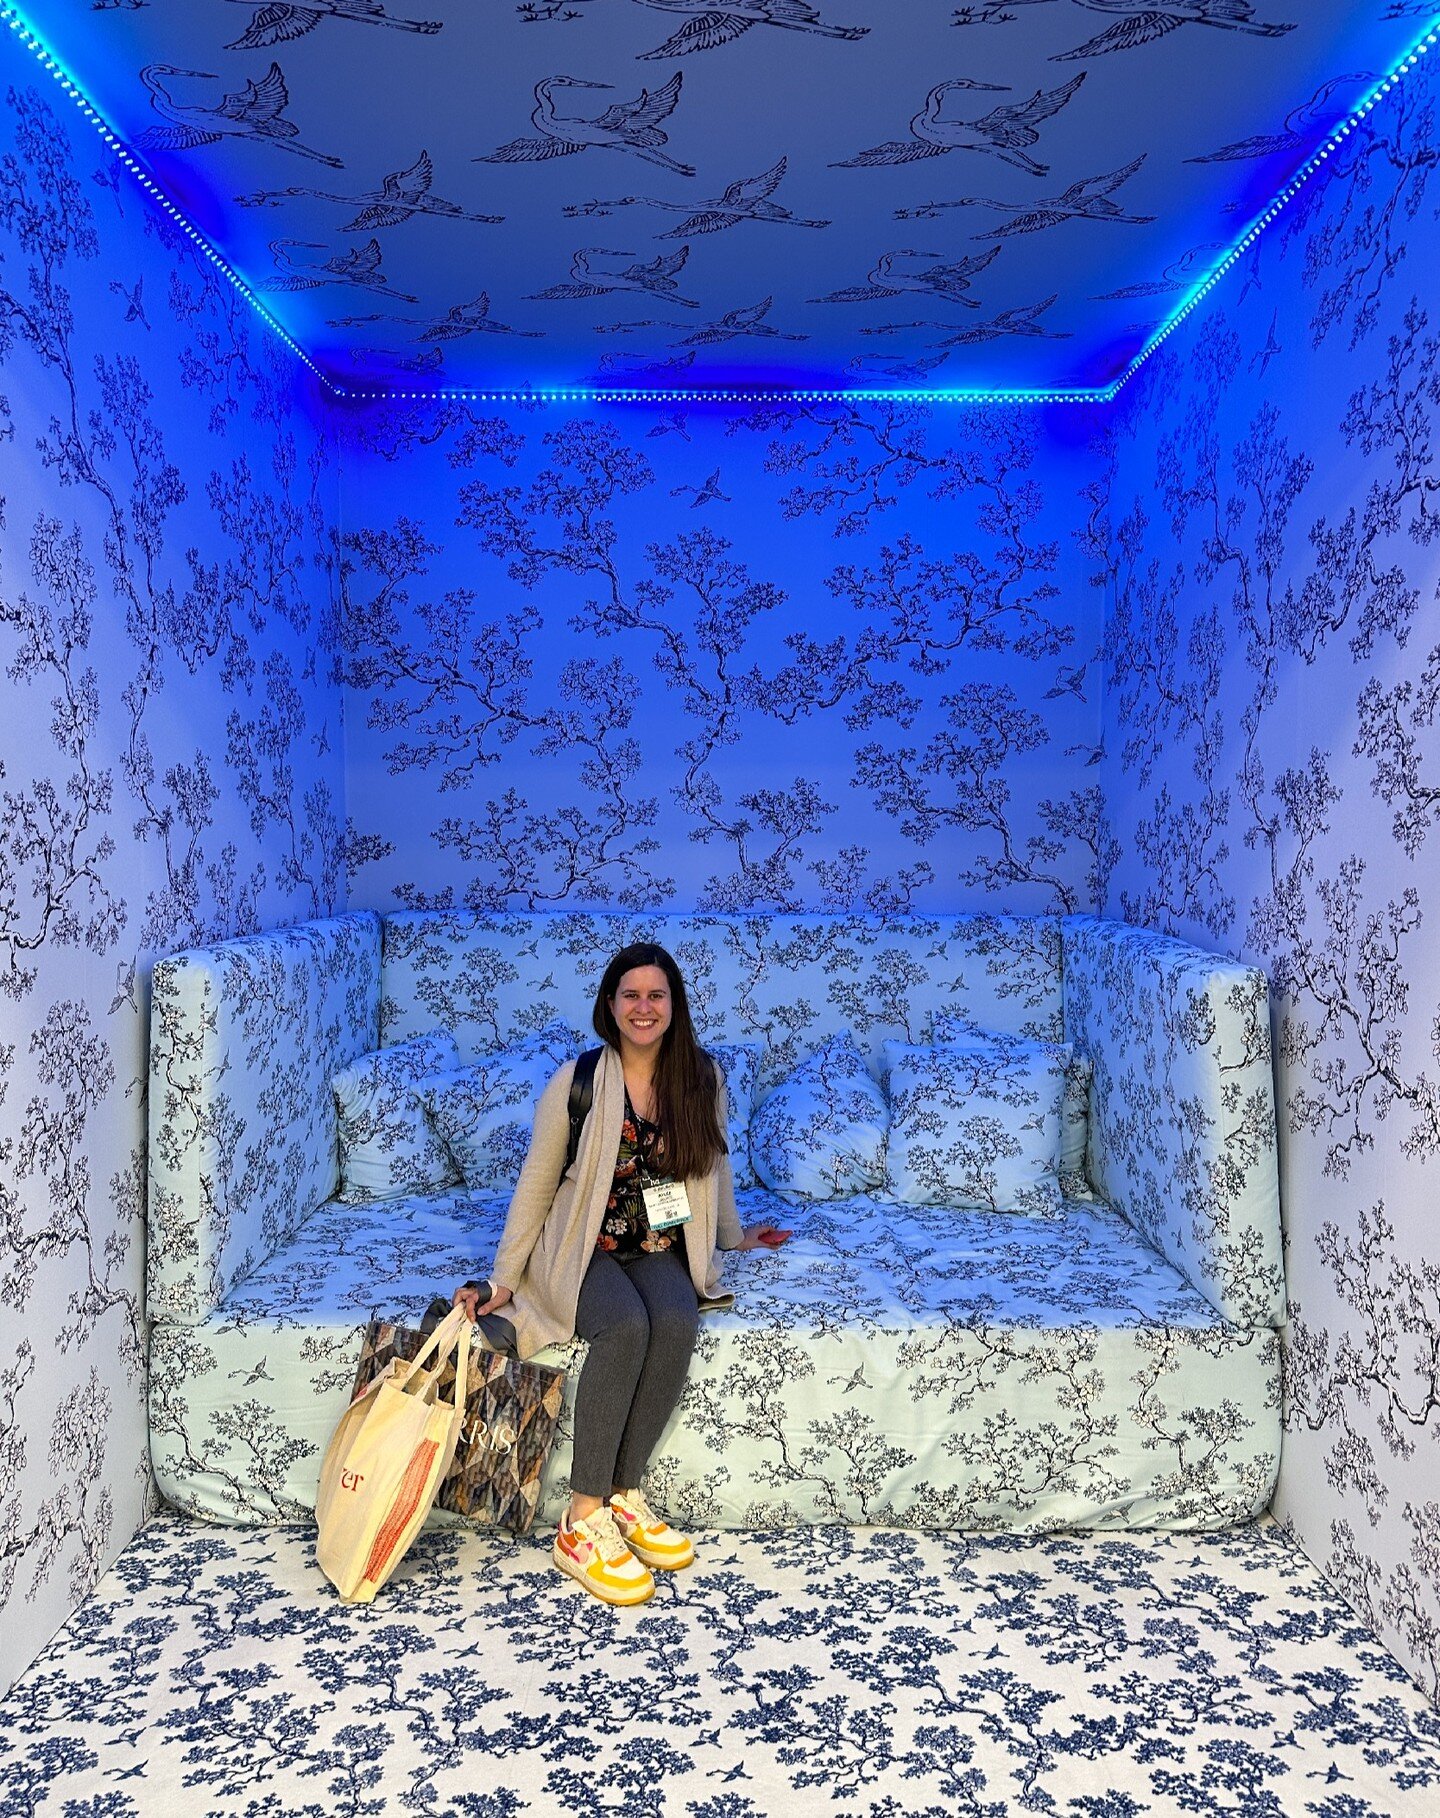 Campo's Interior Design team traveled to Las Vegas this past week for the #HDExpo! The event was full of inspiring displays and left our team ready to bring new ideas to fruition. Interior Design Project Manager Kayleigh Bruentrup had the opportunity